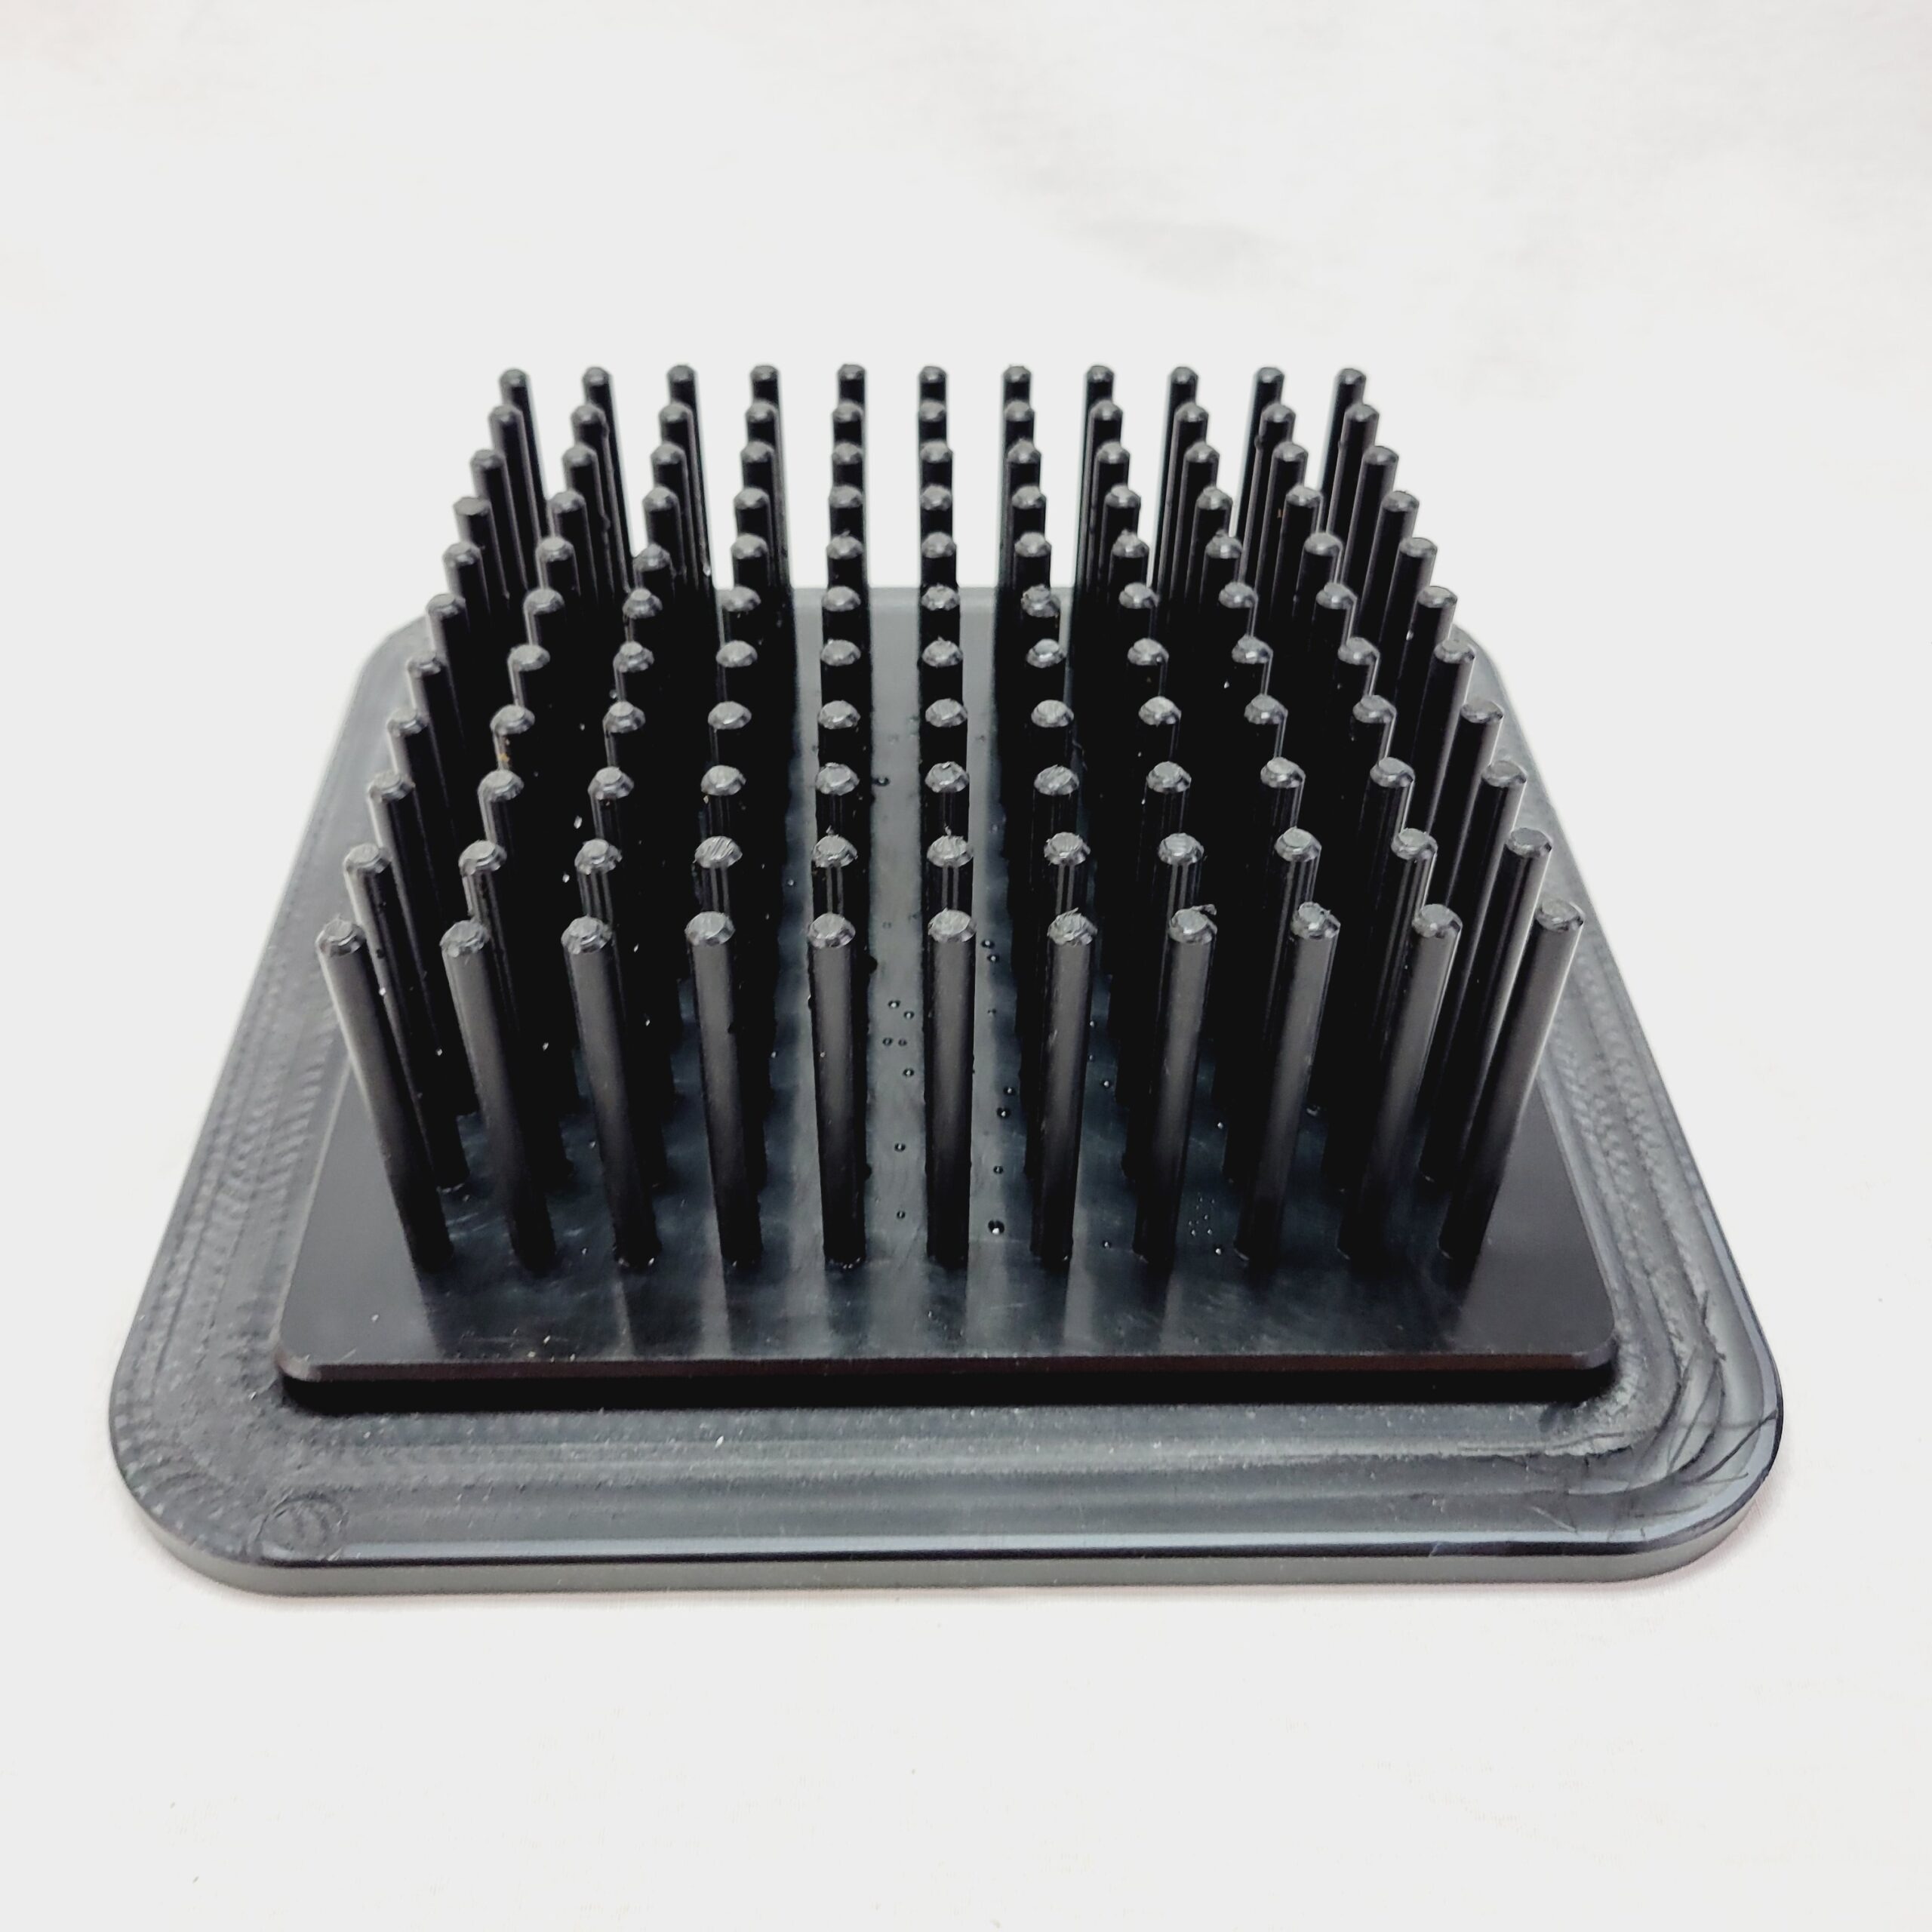 The Metering Tray Clearing Tool is used when material is too resinous to fall out of the Metering Tray by gravity alone.  This single unit is compatible with the 109mm, 98mm, 84mm, and 70mm Adjustable Metering Trays.